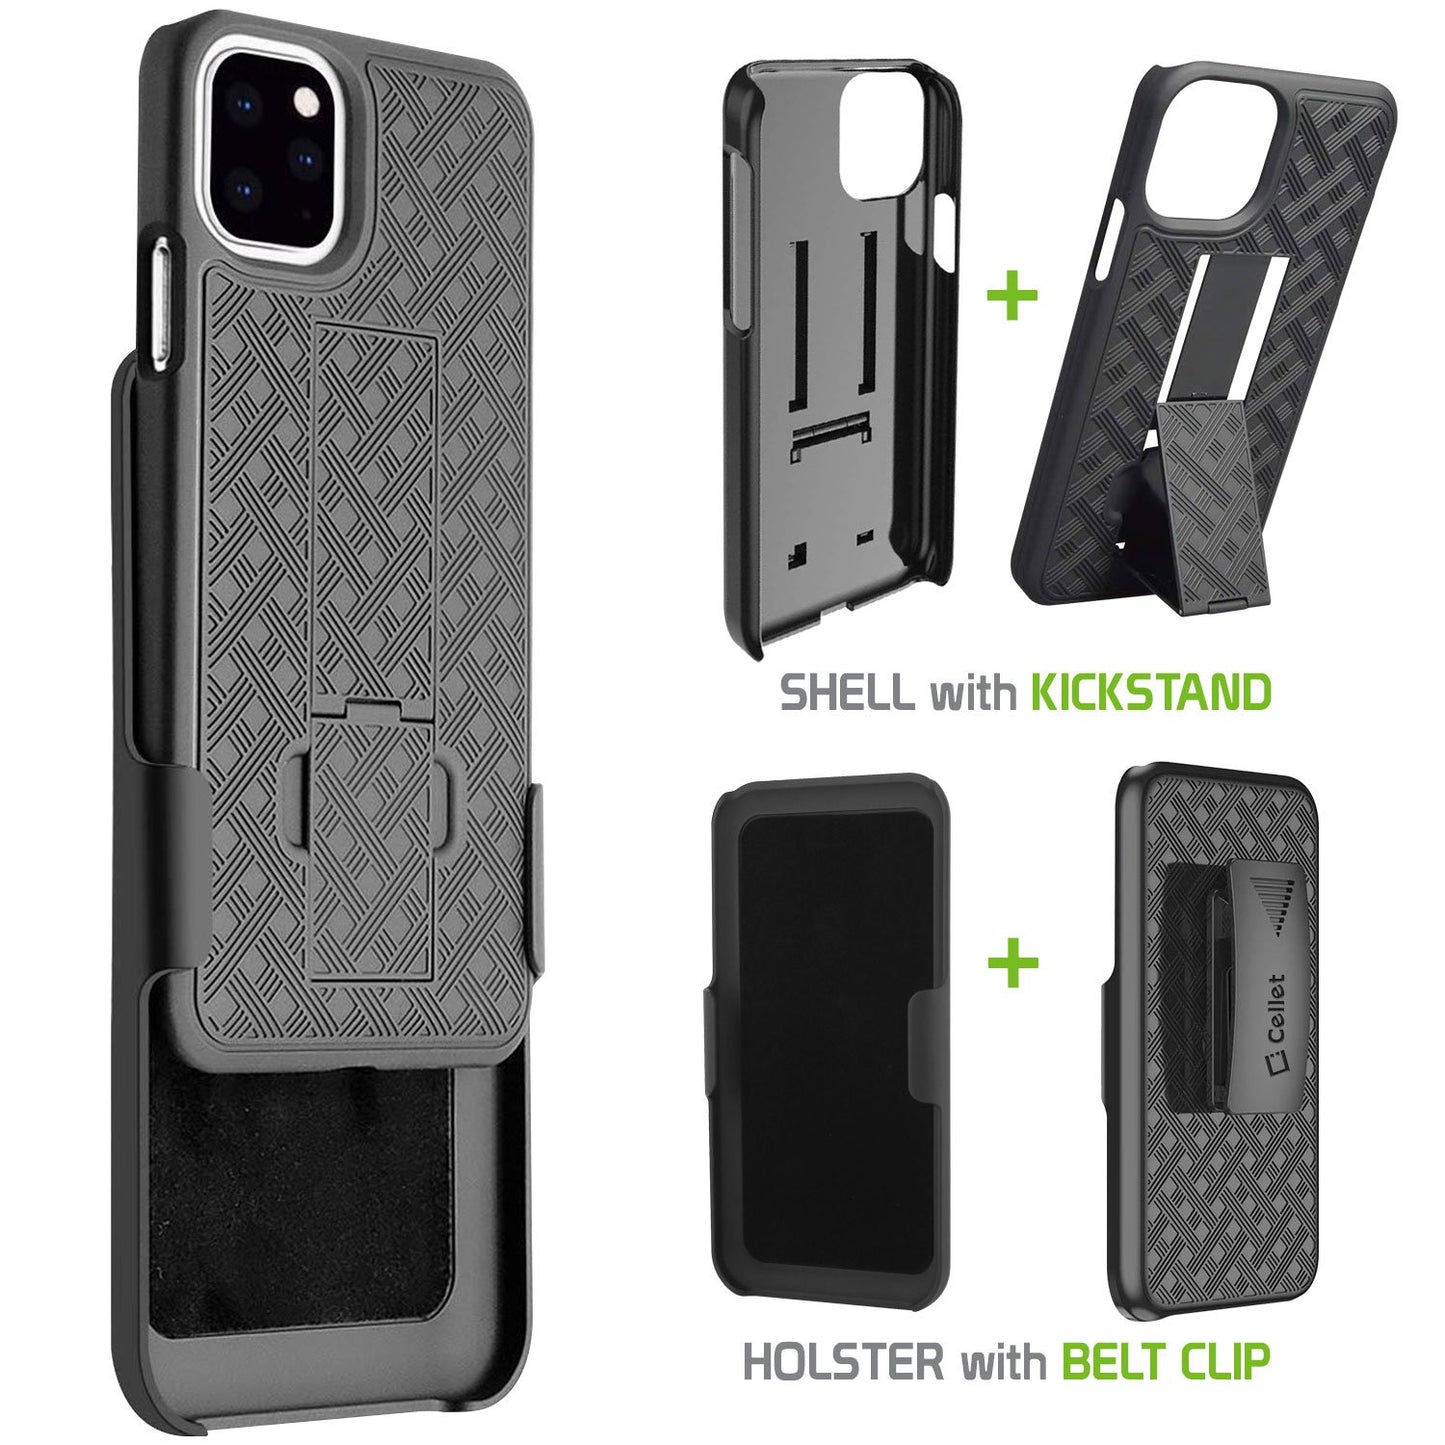 HLIPH11PROM -IPhone 11 Pro Max Belt Clip Holster & Shell Case with Kickstand Heavy Duty Protection